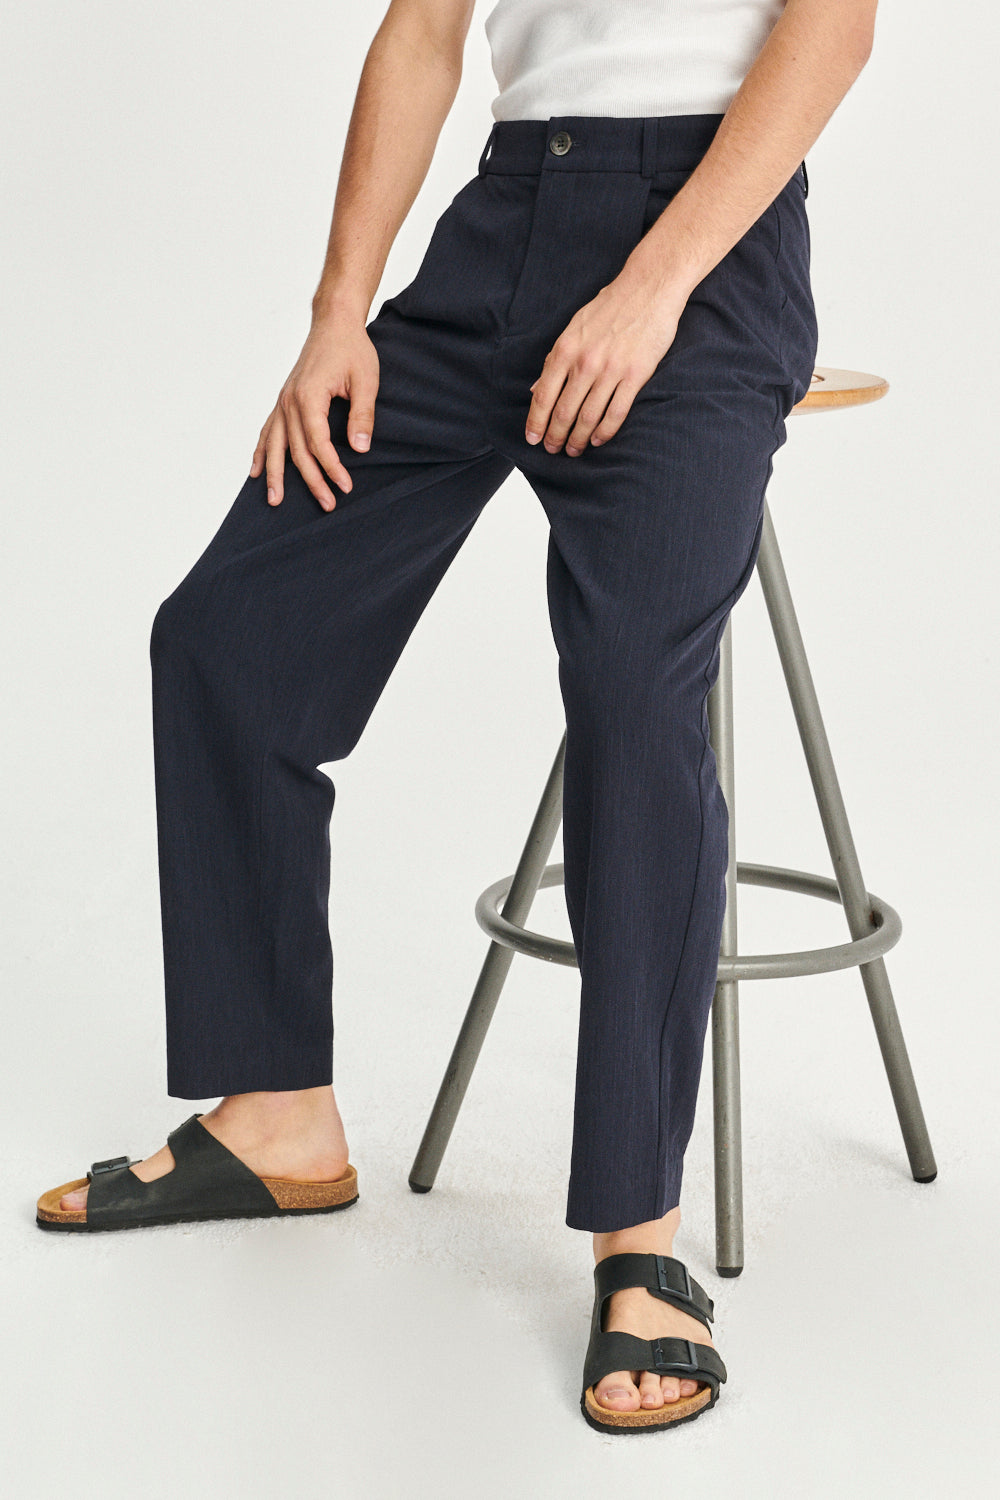 Genuine Trousers in a Navy Italian Virgin Wool and Viscose Crepe